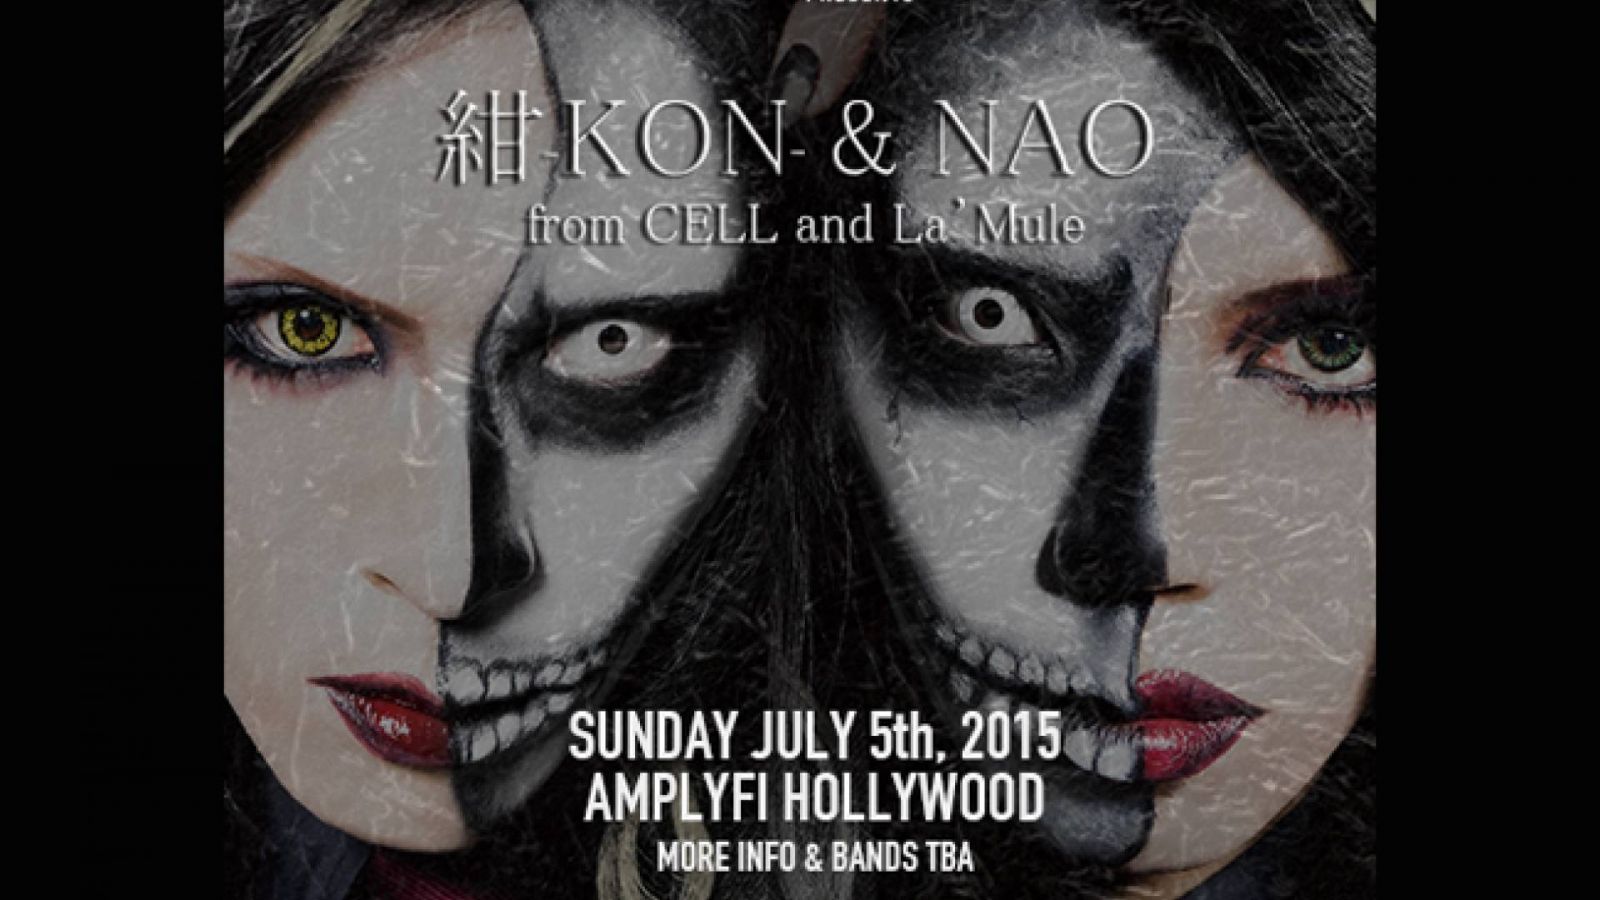 KON & NAO from CELL to Perform in LA © CELL